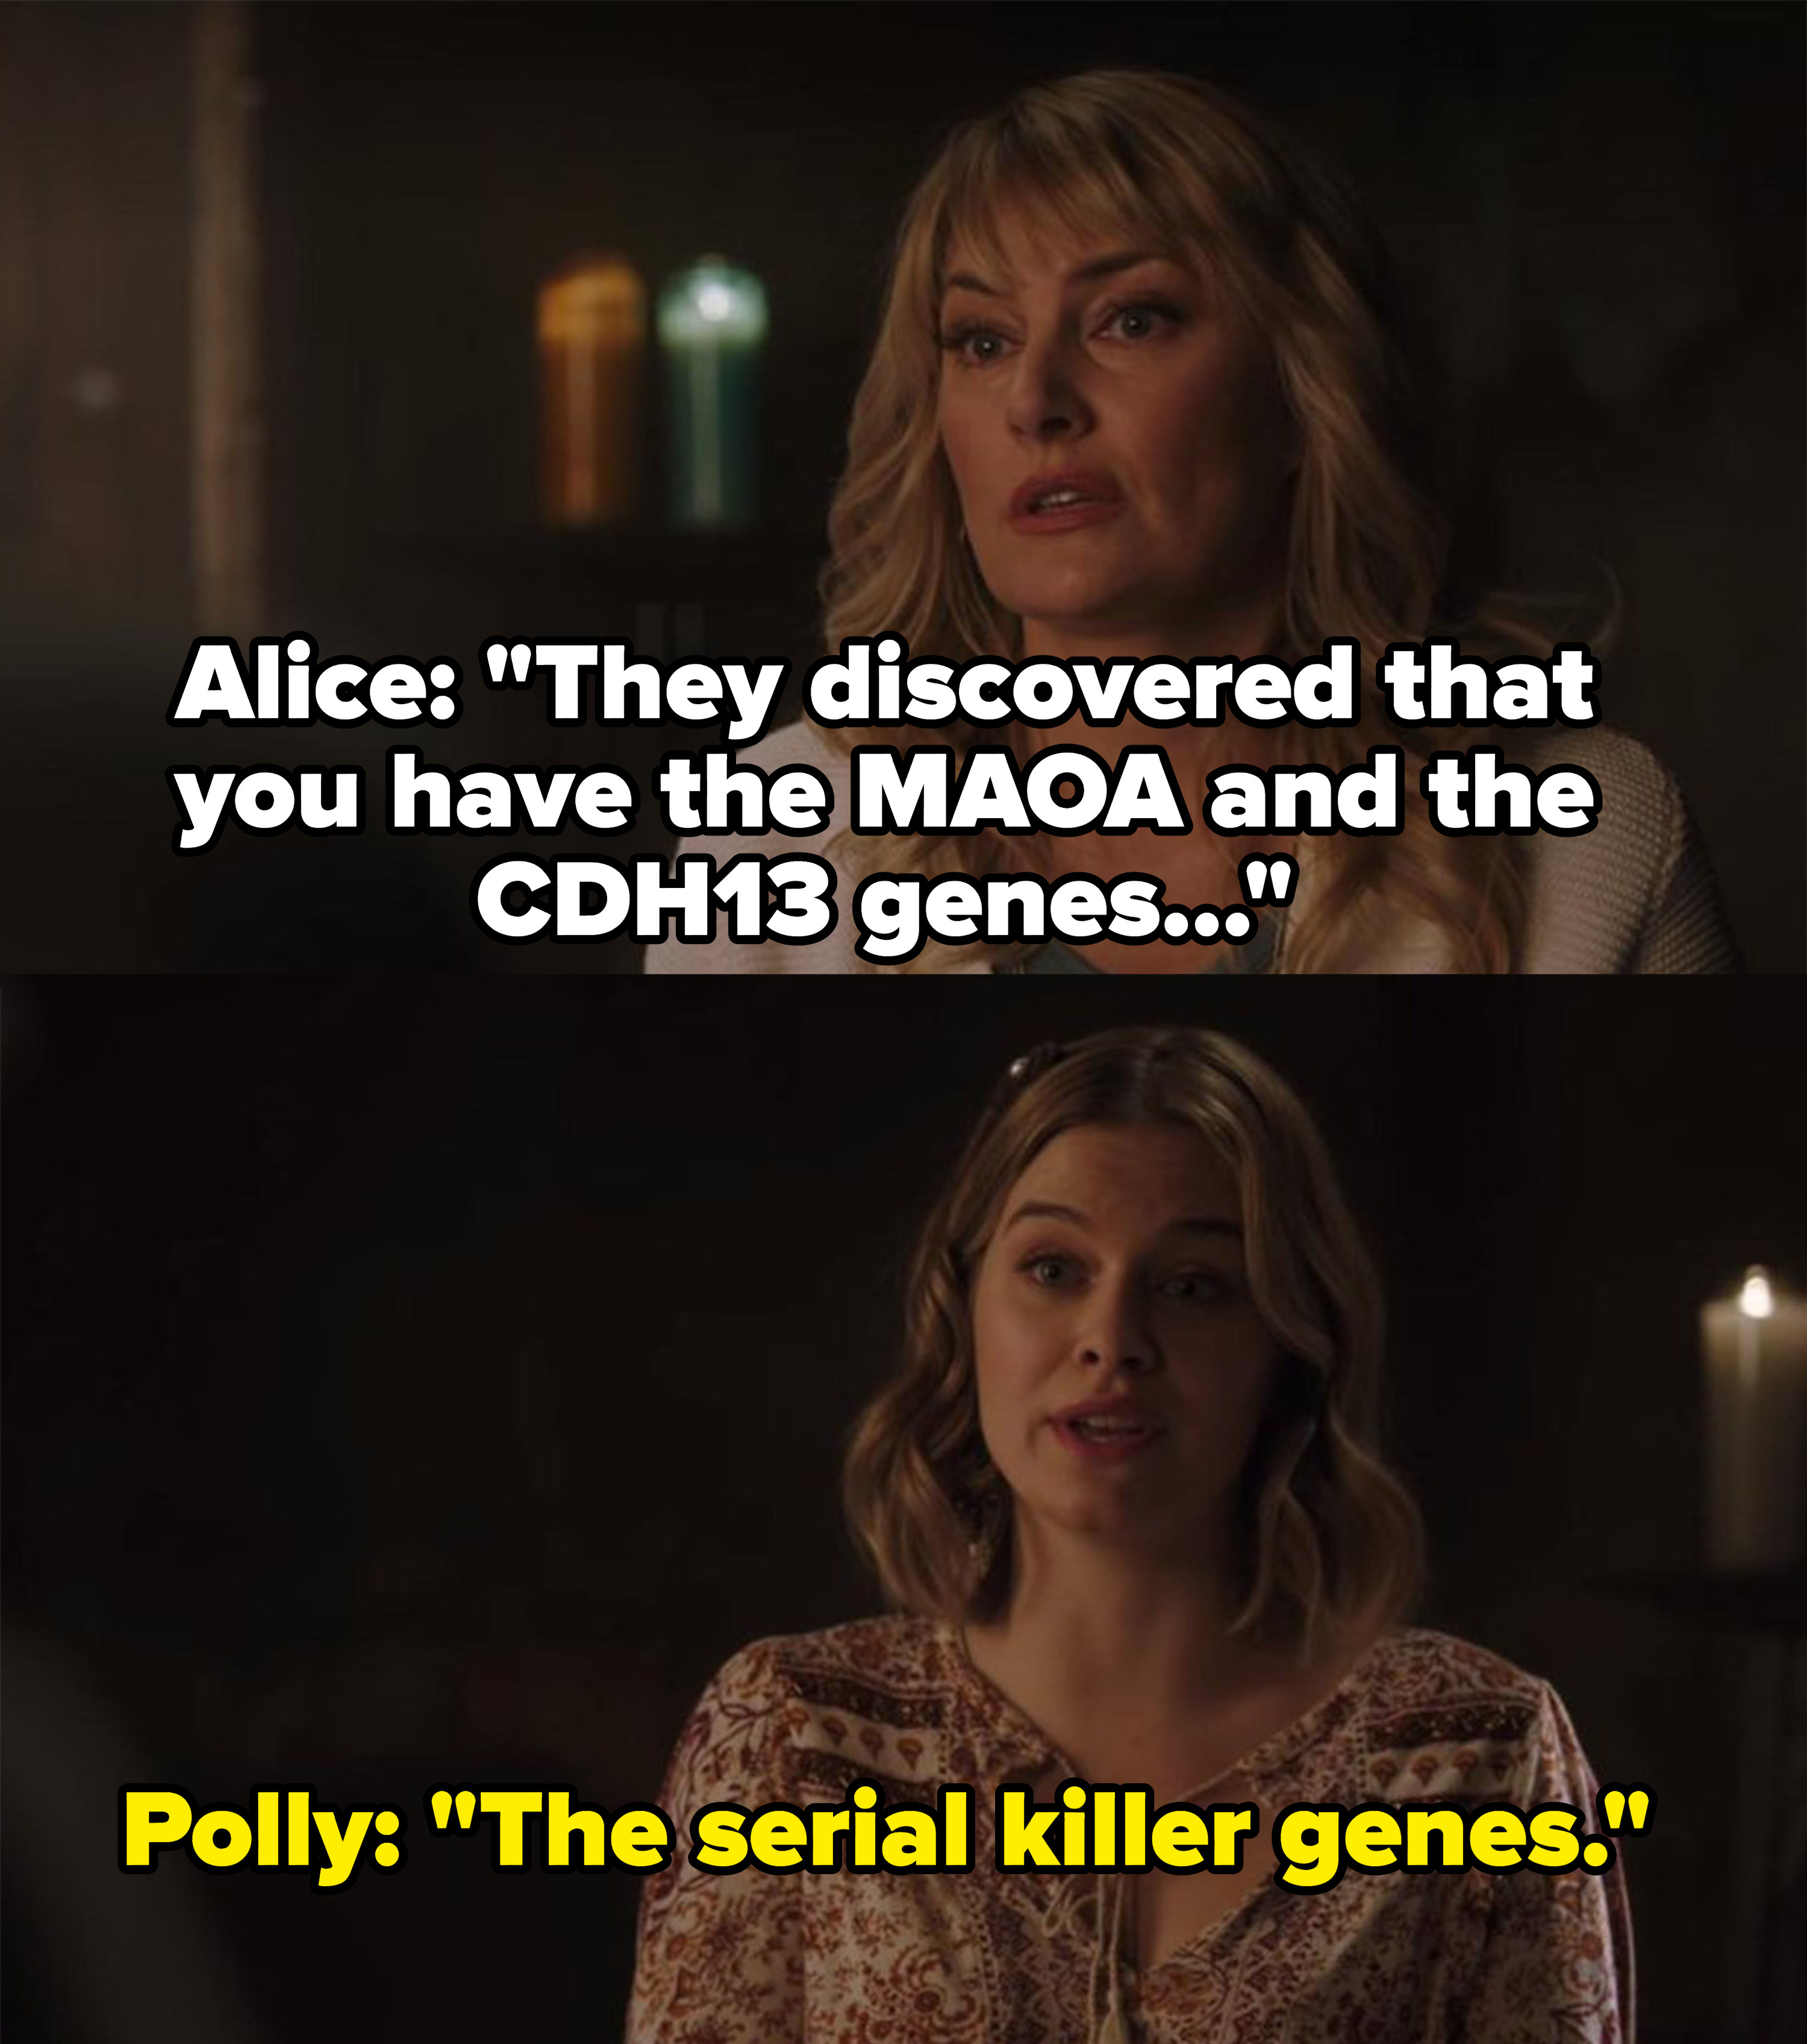 Alice says &quot;They discovered that you have the MAOA and the CDH13 genes&quot; and Polly says, &quot;The serial killer genes&quot;